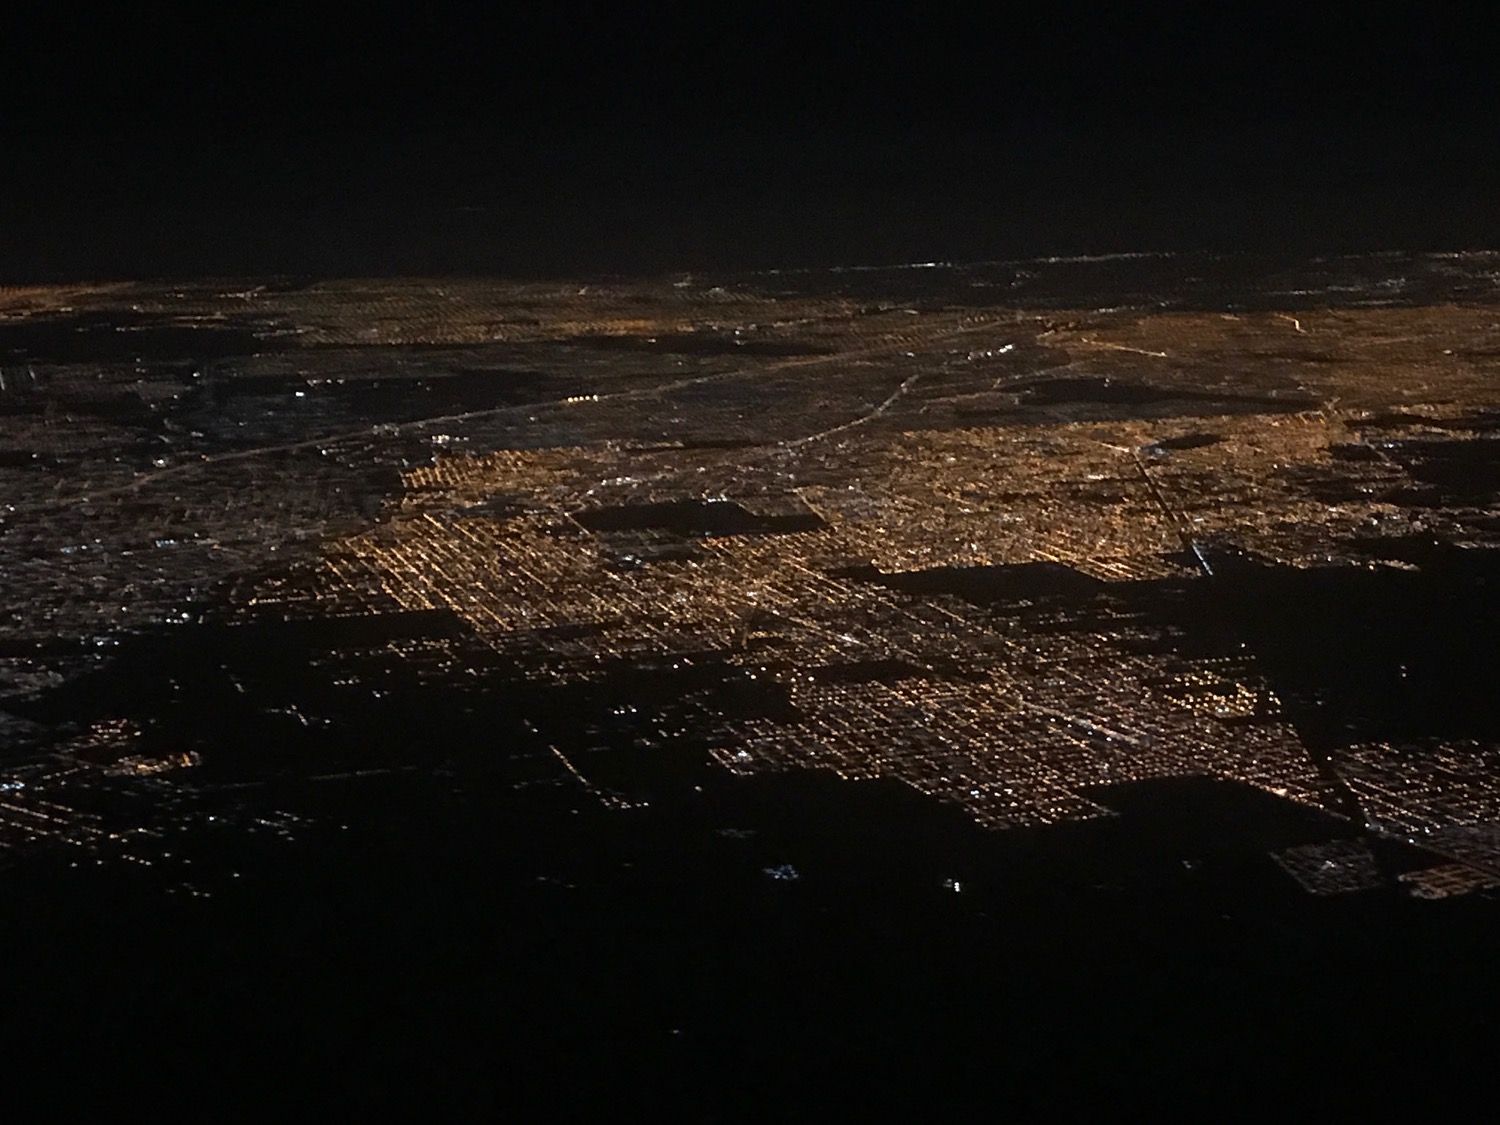 an aerial view of a city at night